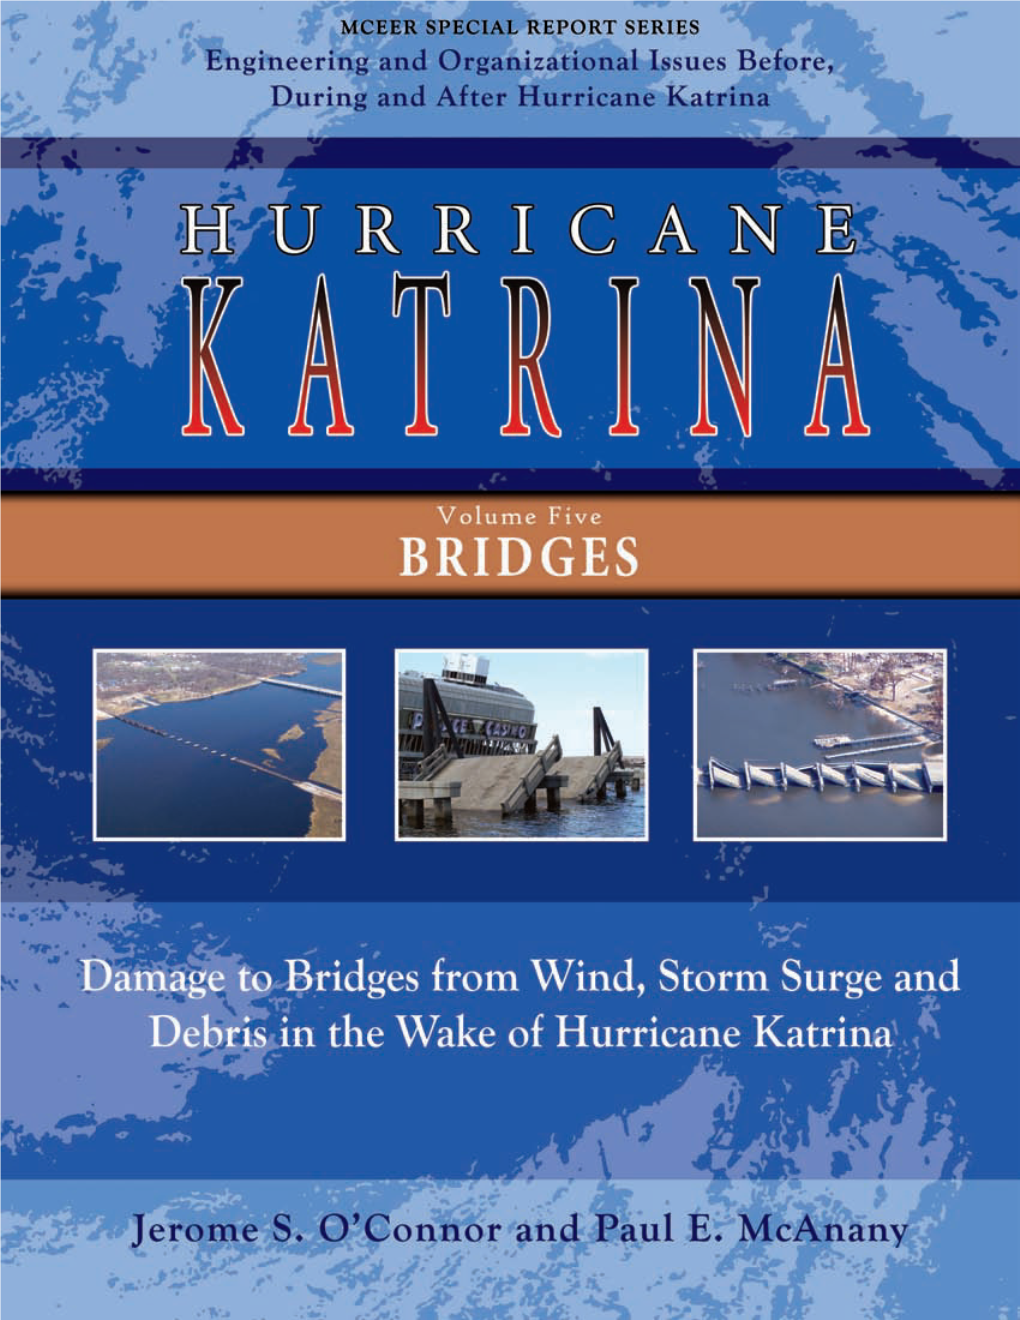 Damage to Bridges from Wind, Storm Surge and Debris in the Wake of Hurricane Katrina